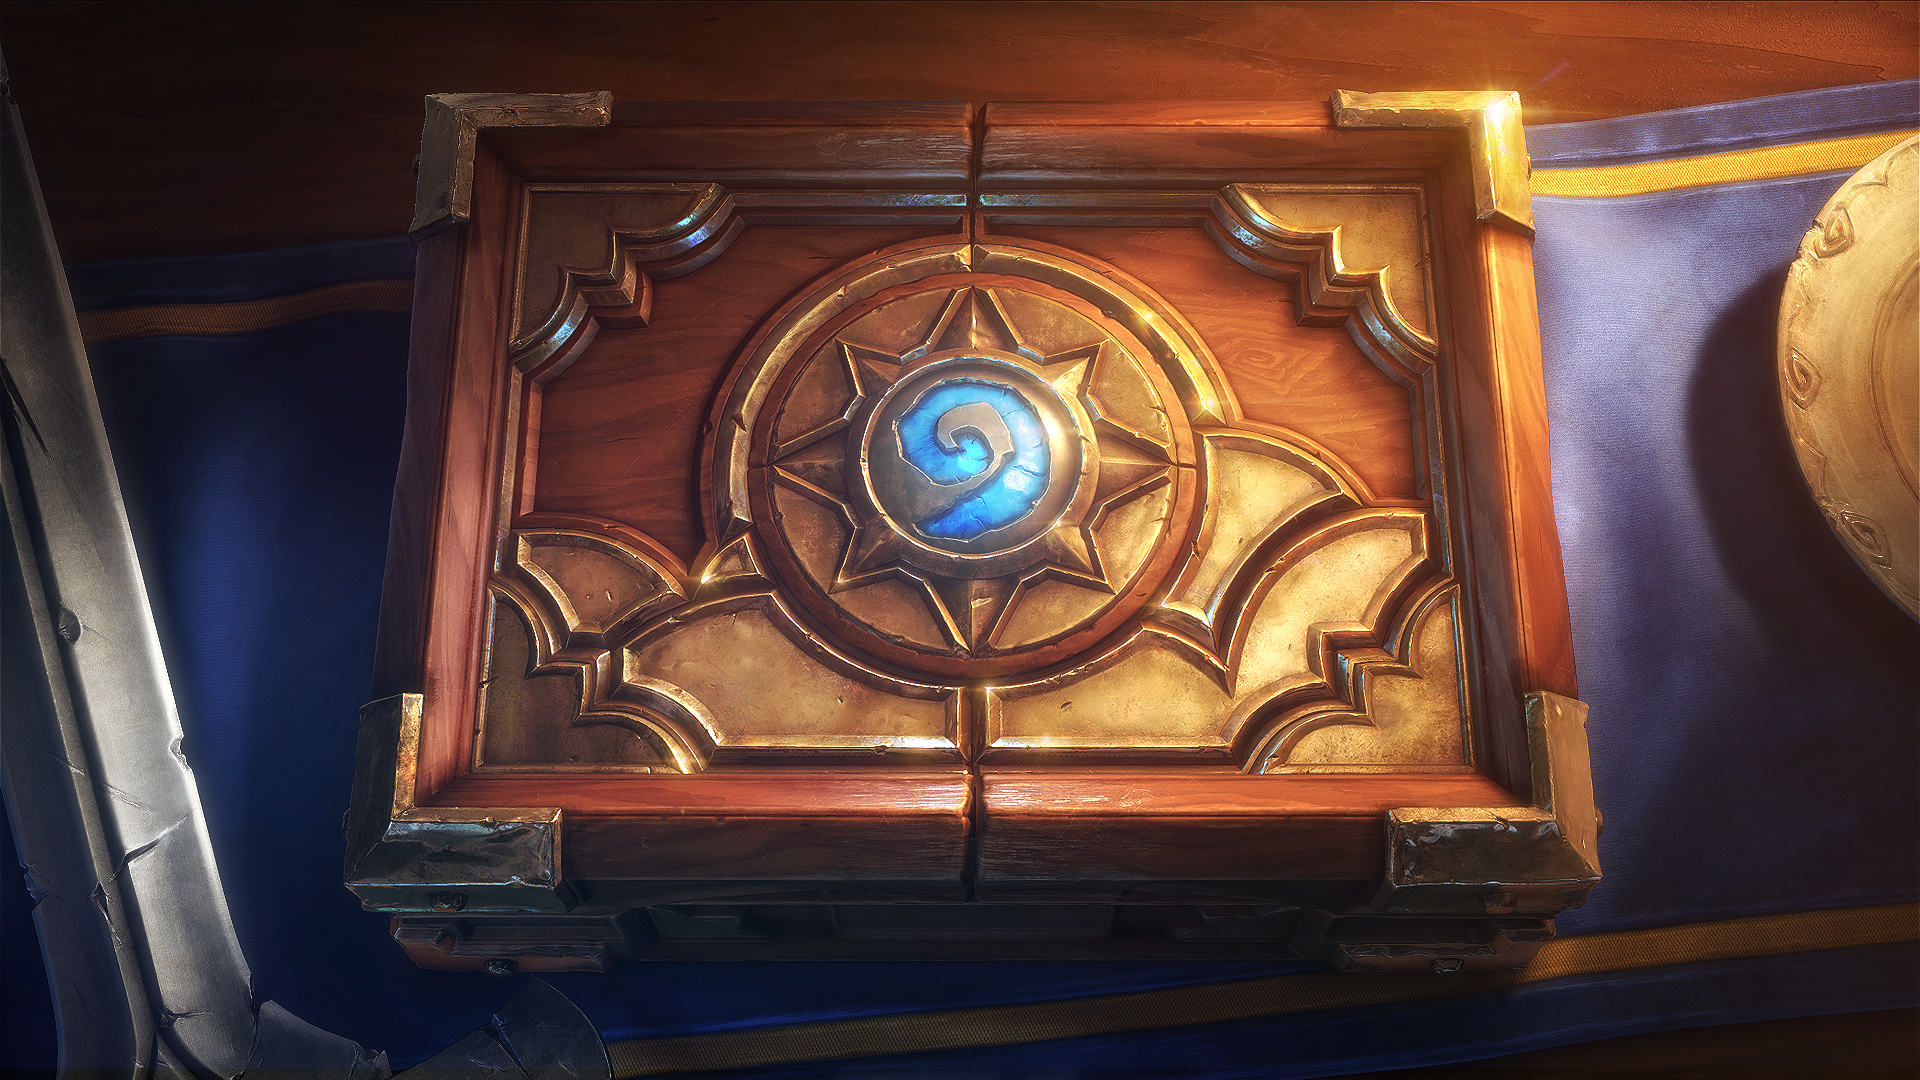 Video Game Hearthstone Heroes Of Warcraft 1920x1080